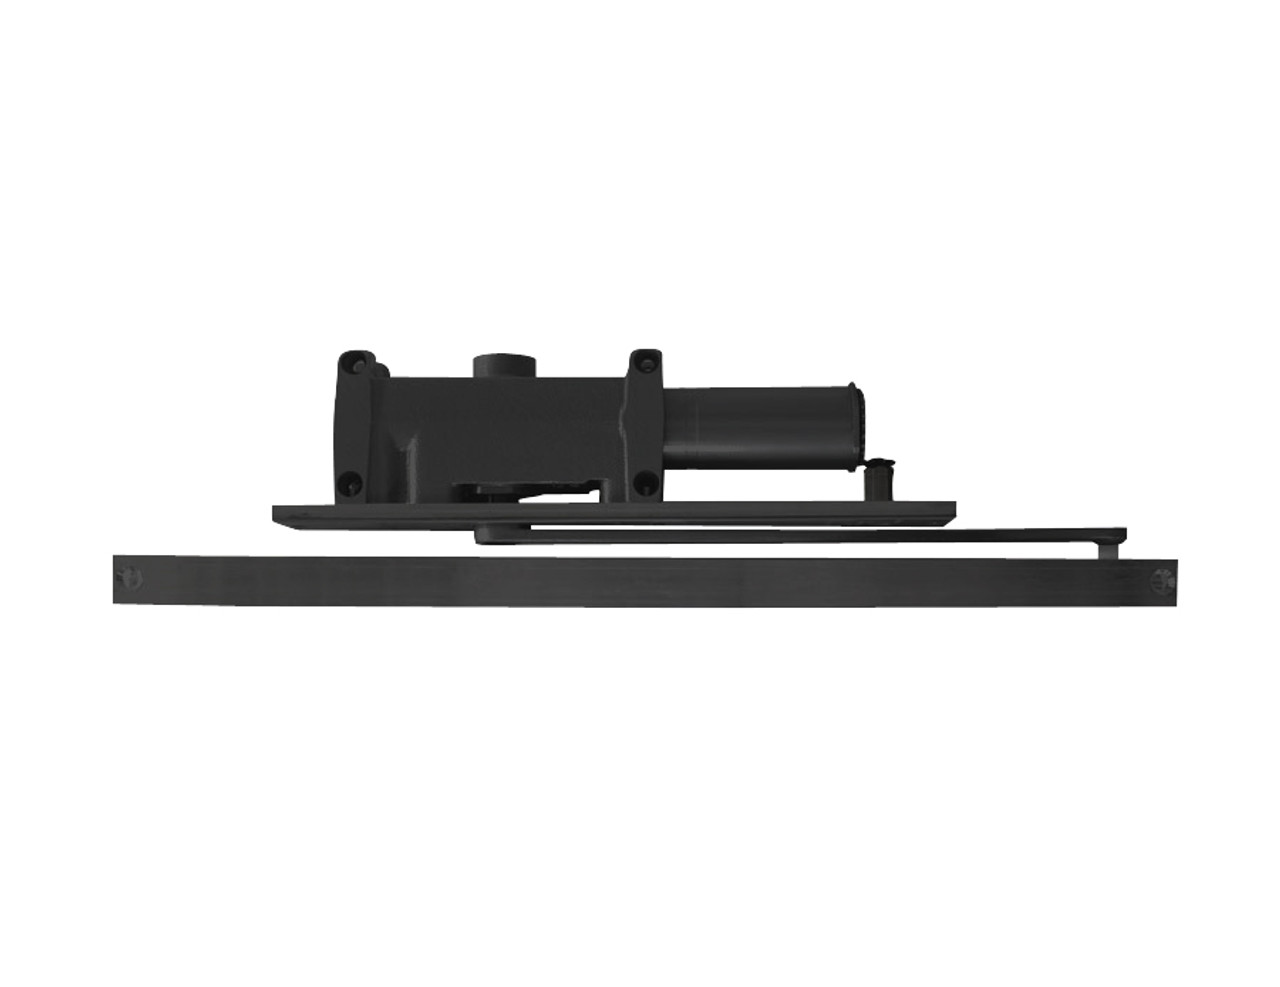 5016-H-LH-BLACK LCN Door Closer with Hold Open Arm in Black Finish